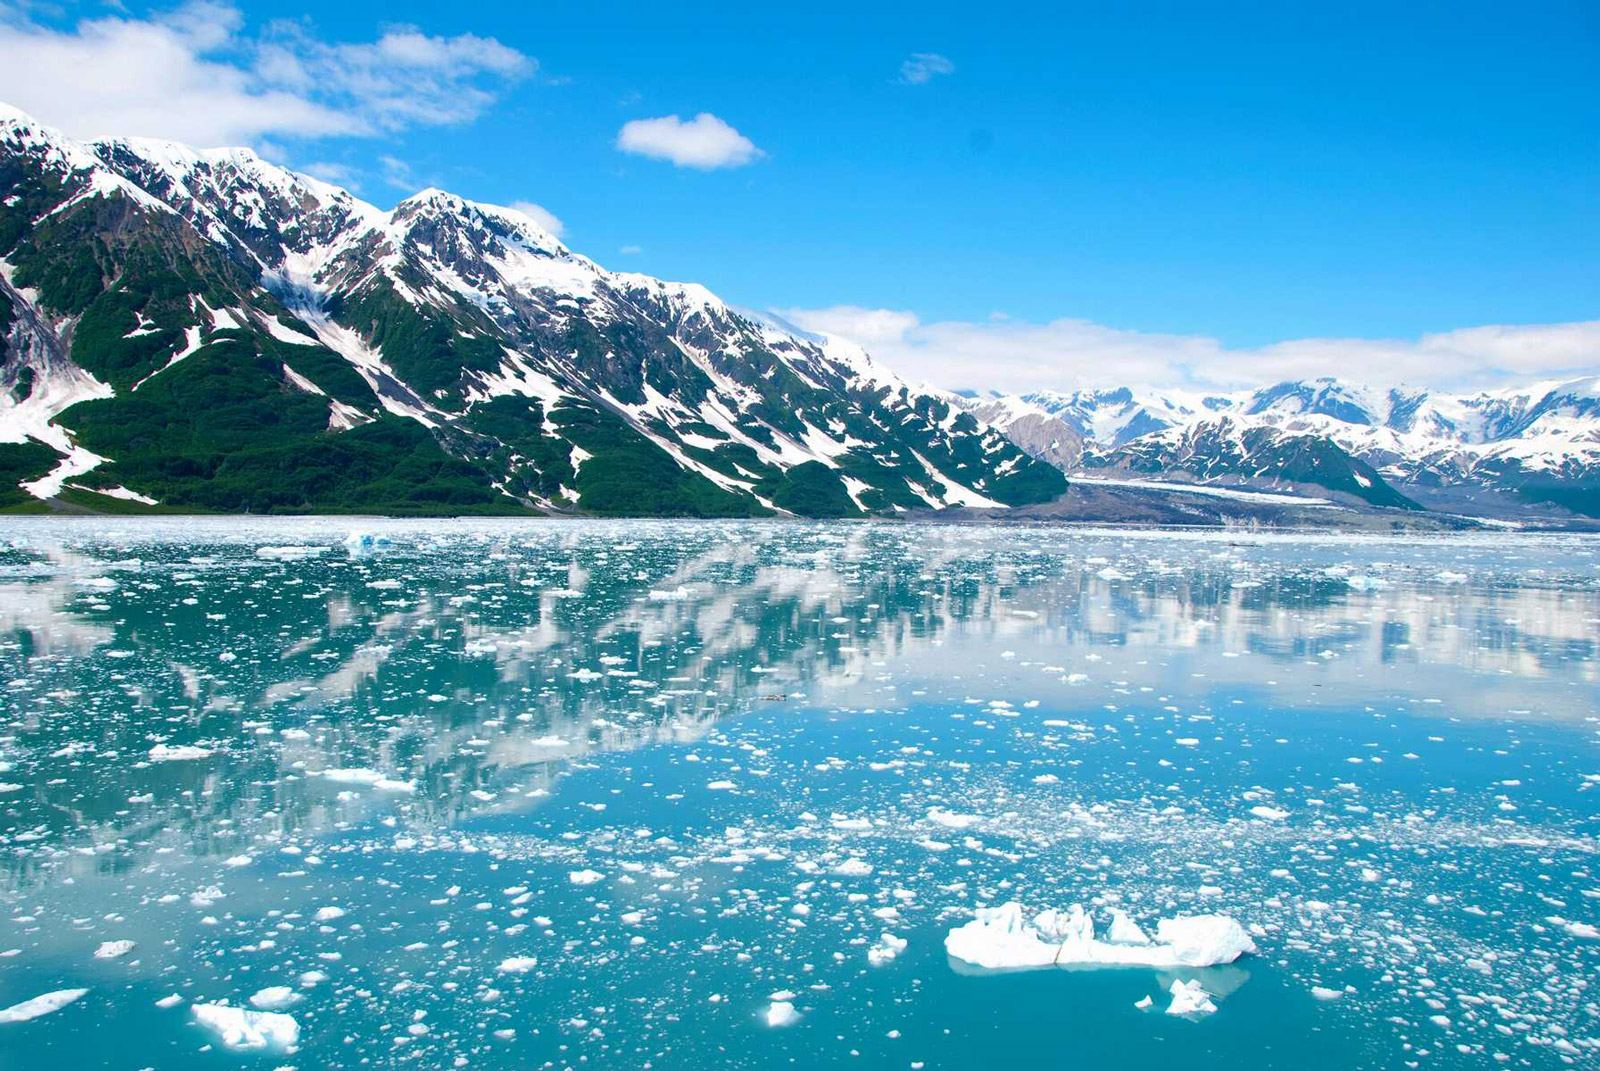 16 Fun and Interesting Facts About Alaska